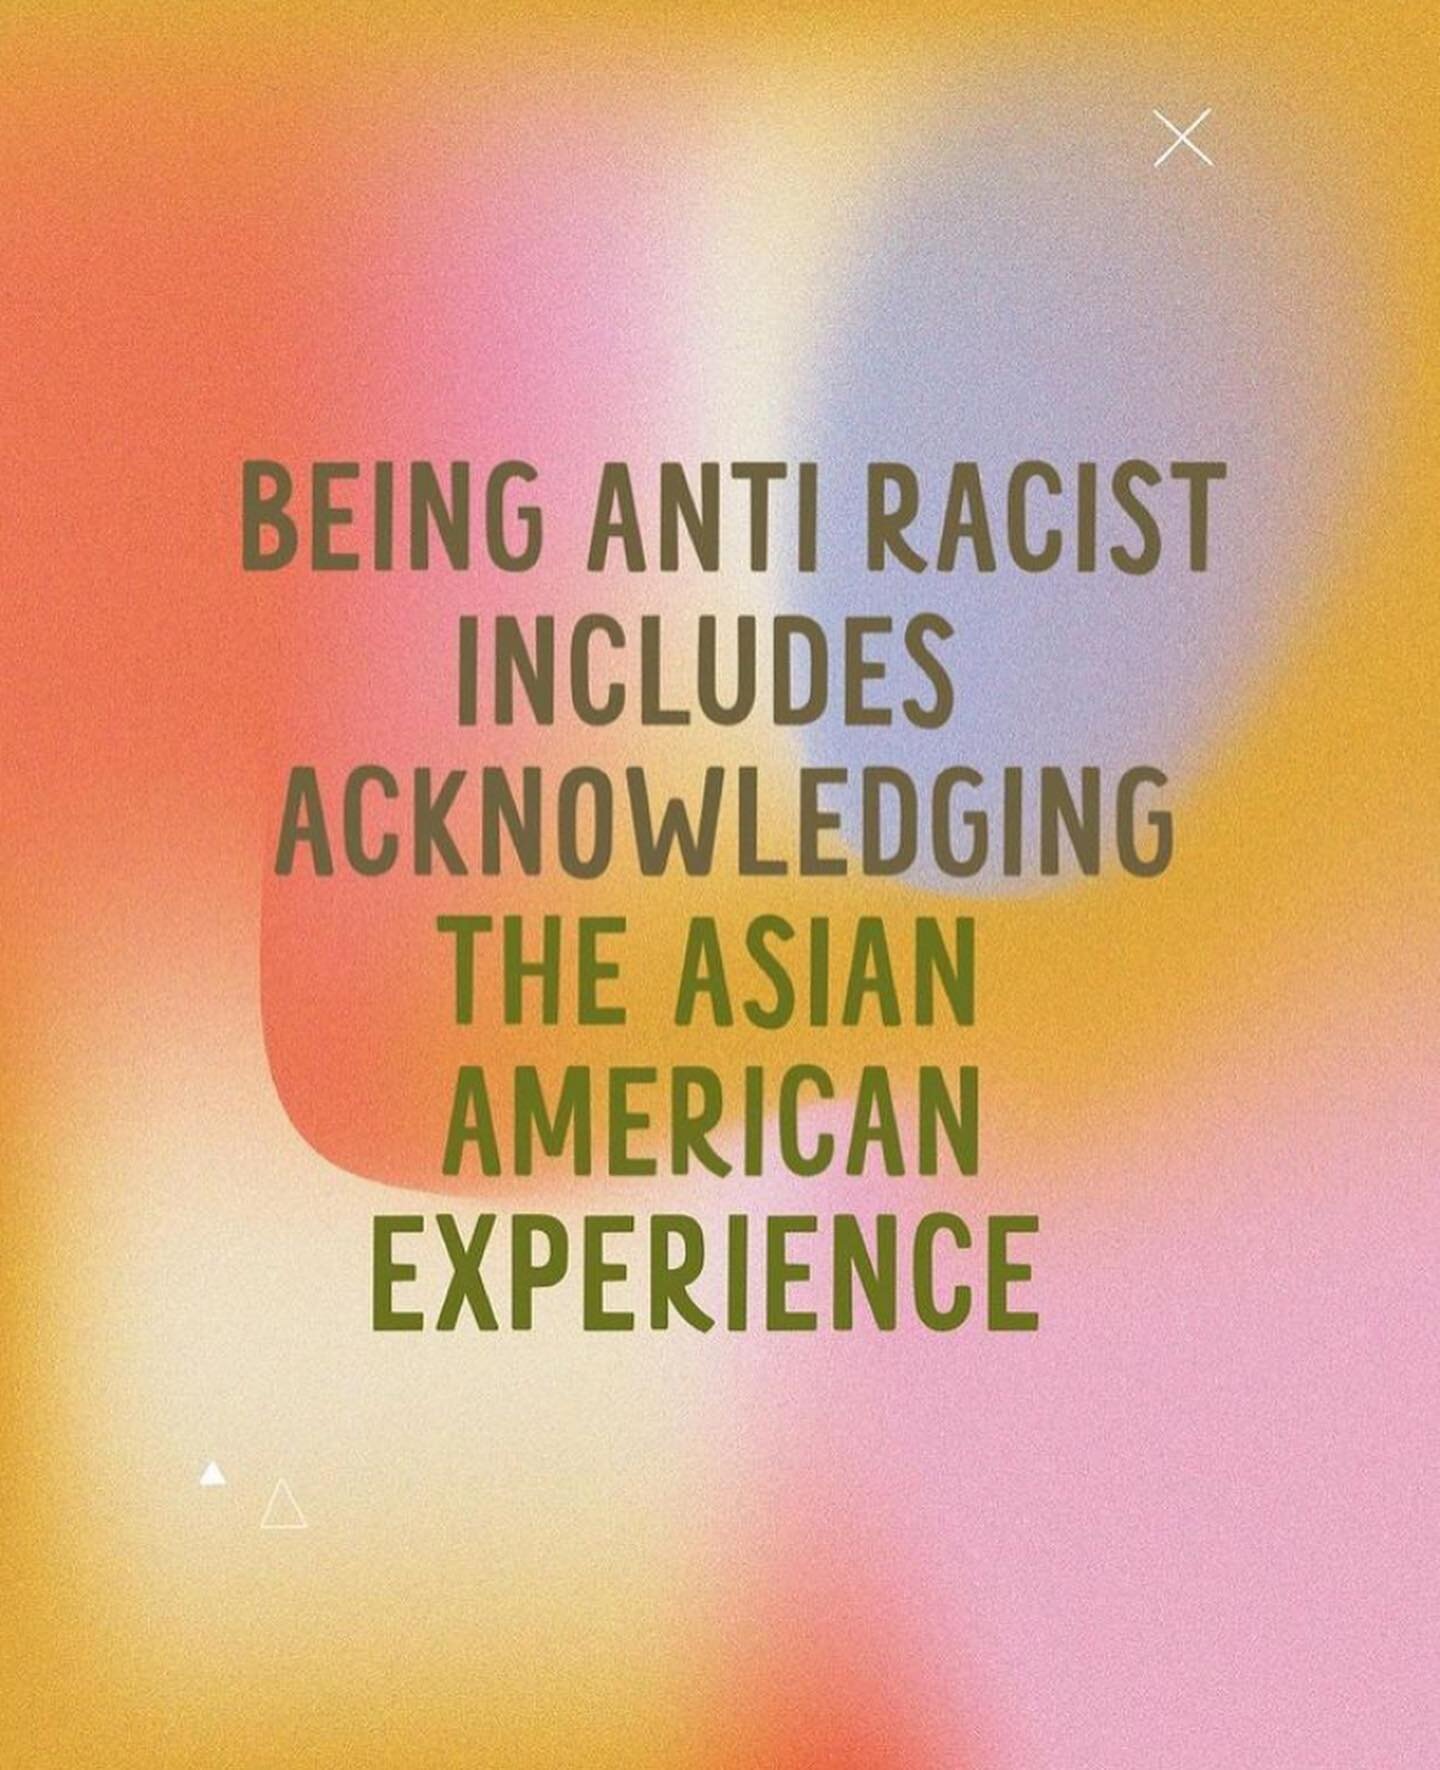 White supremacy is killing all of us. I'm so disgusted by the violence against the AAPI community. Getting free can't happen in a demographic-based vacuum, we have to call out and interrupt violence, white supremacy and oppression everywhere we see i